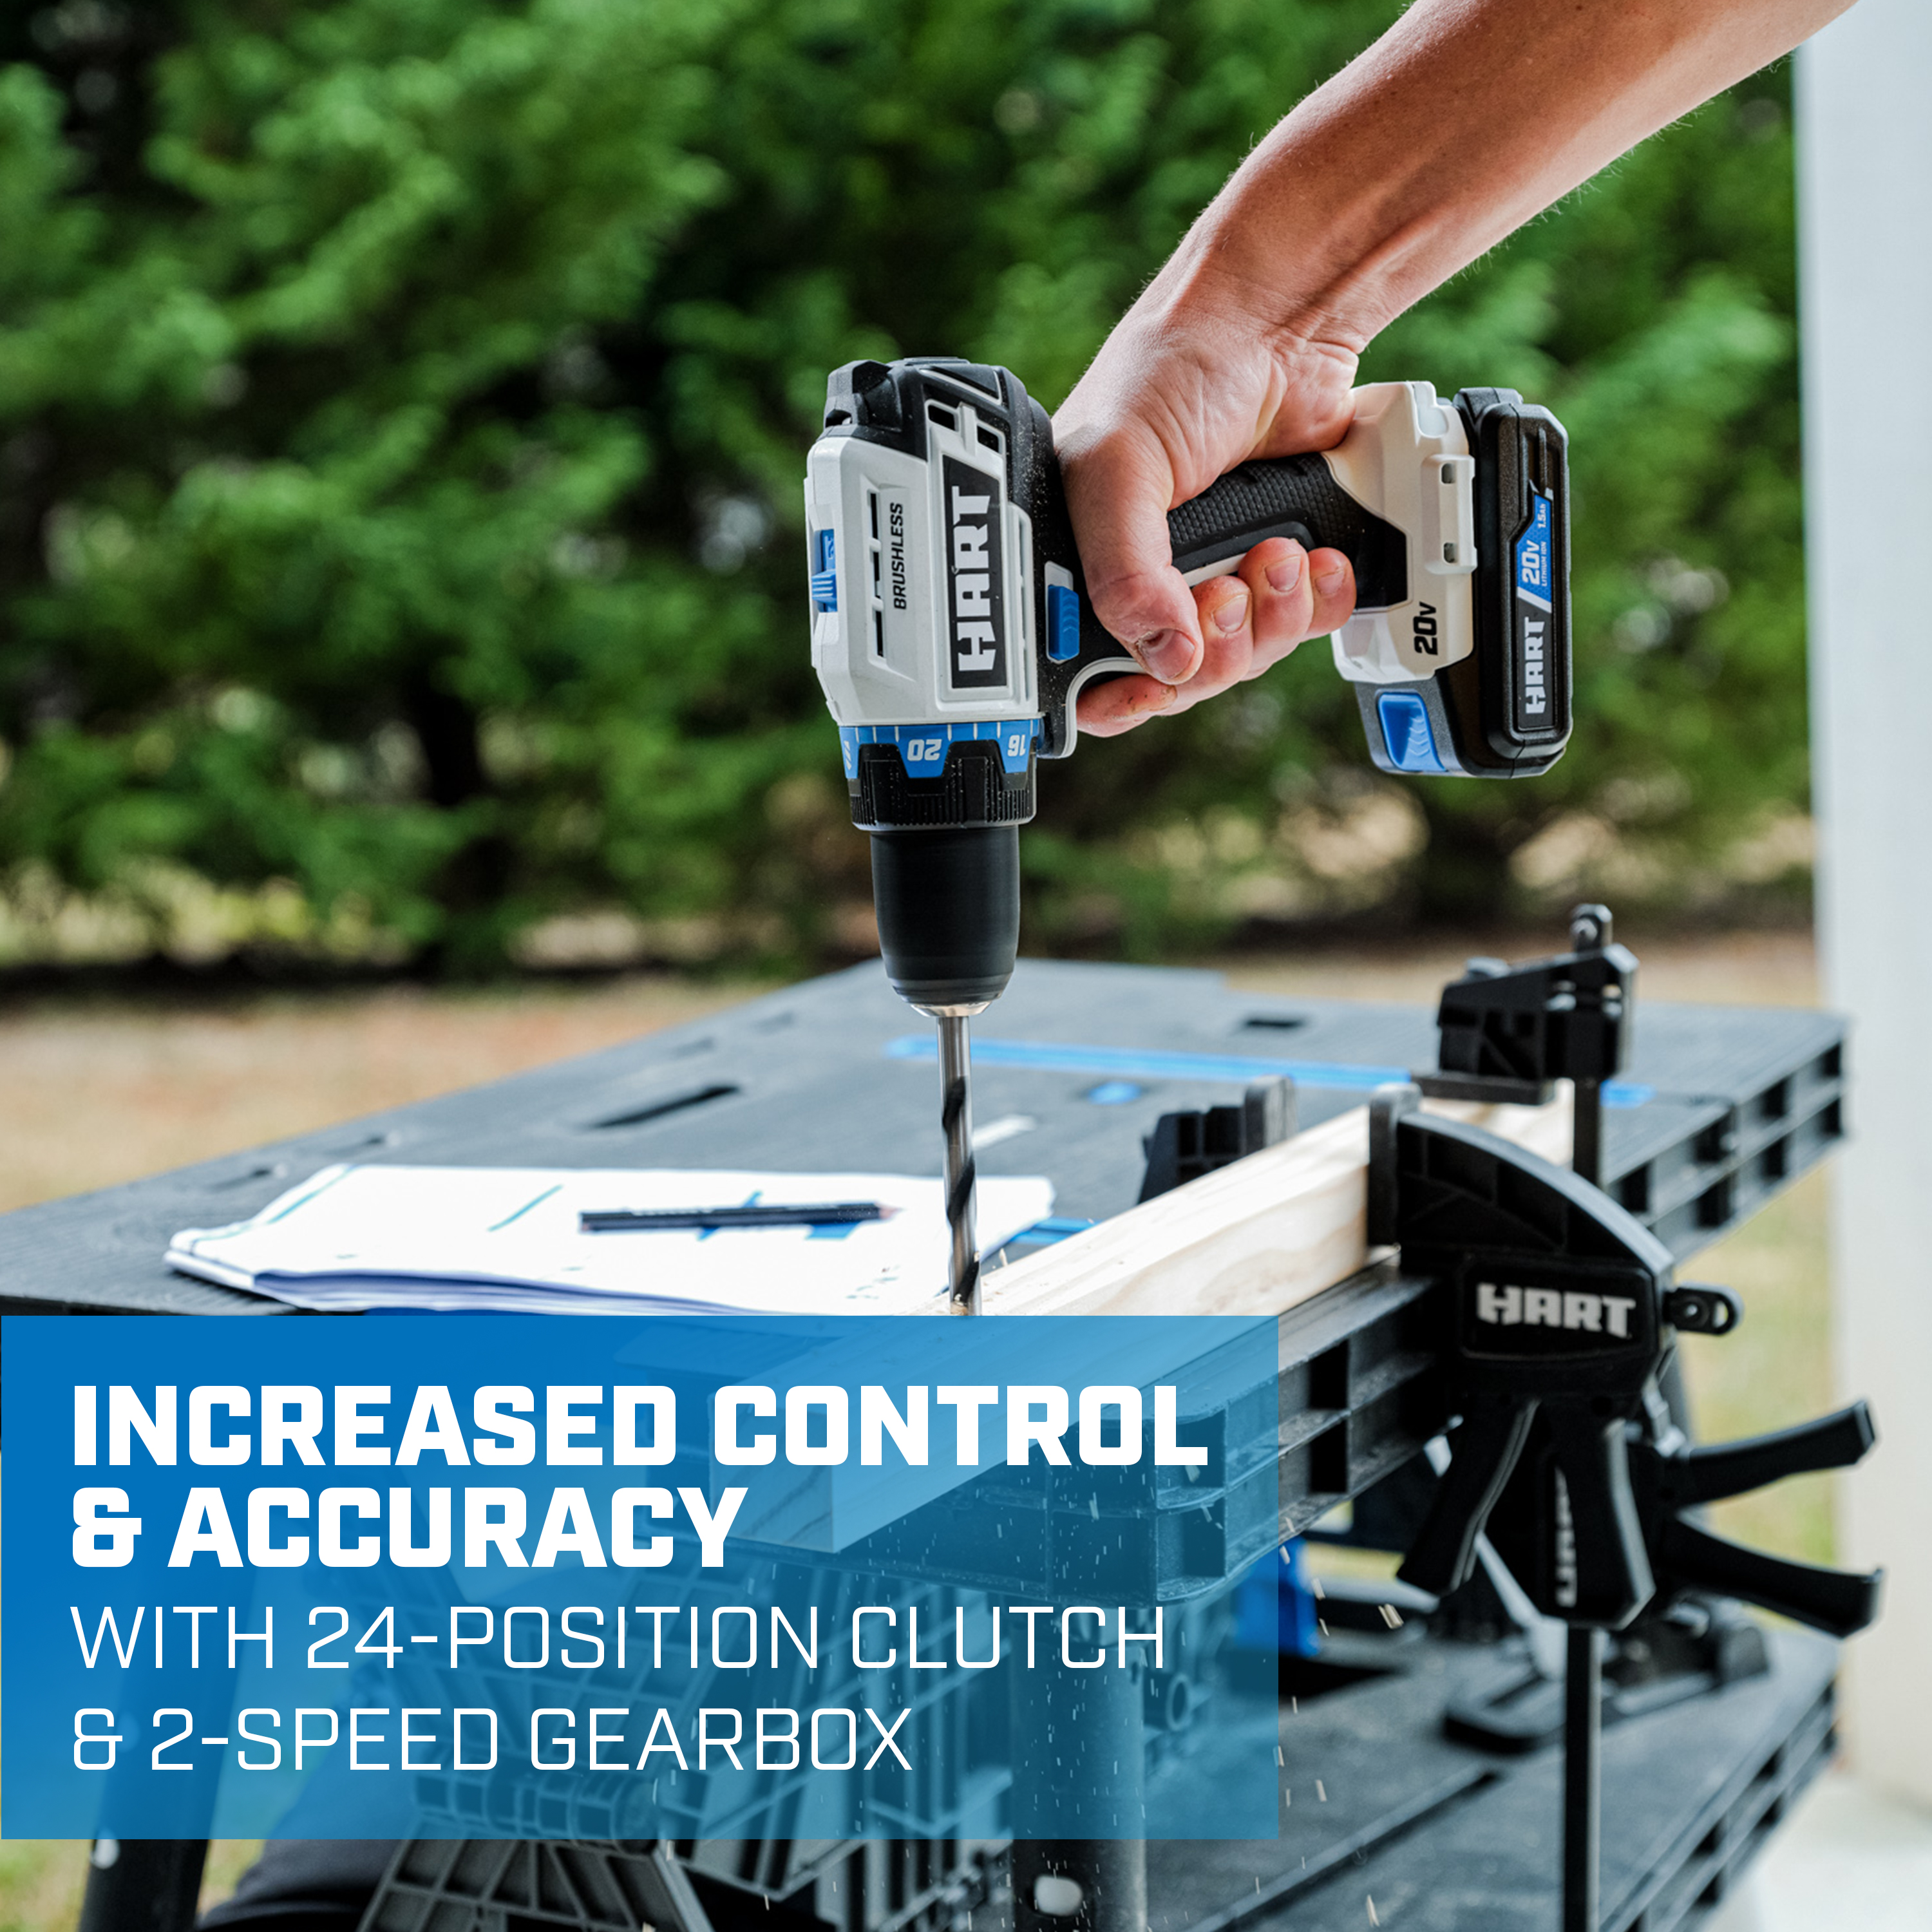 increased control and accuracy with 24 position clutch and 2-speed gearbox